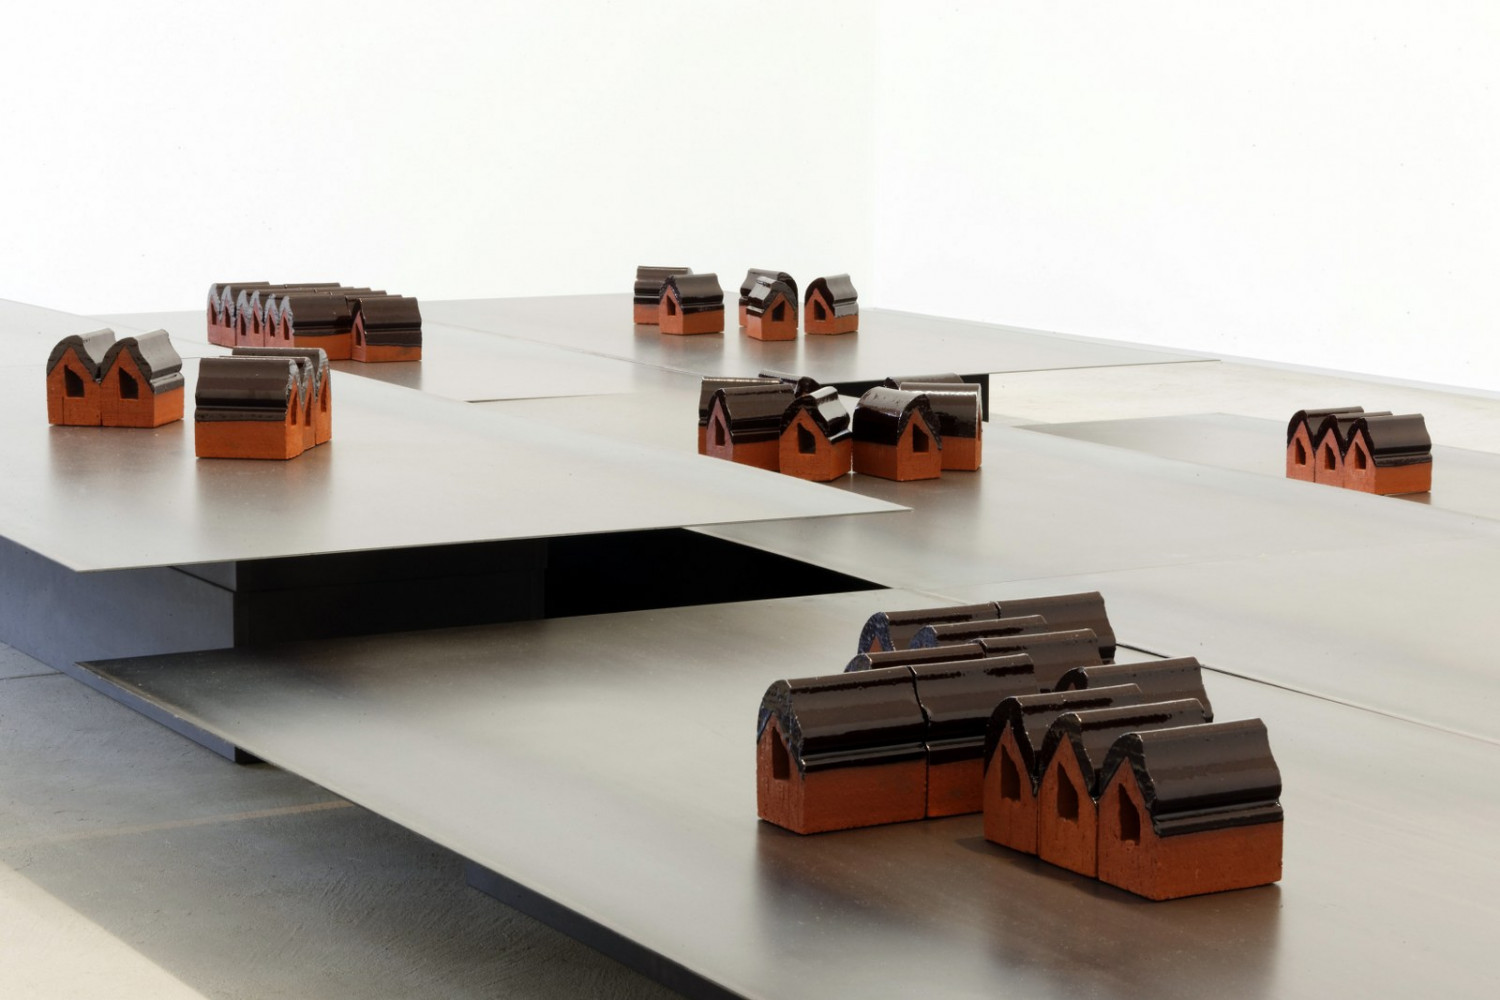 Bettina Pousttchi, ‘Plano Piloto (detail)’, 2014, fired and glazed clay, steel platform